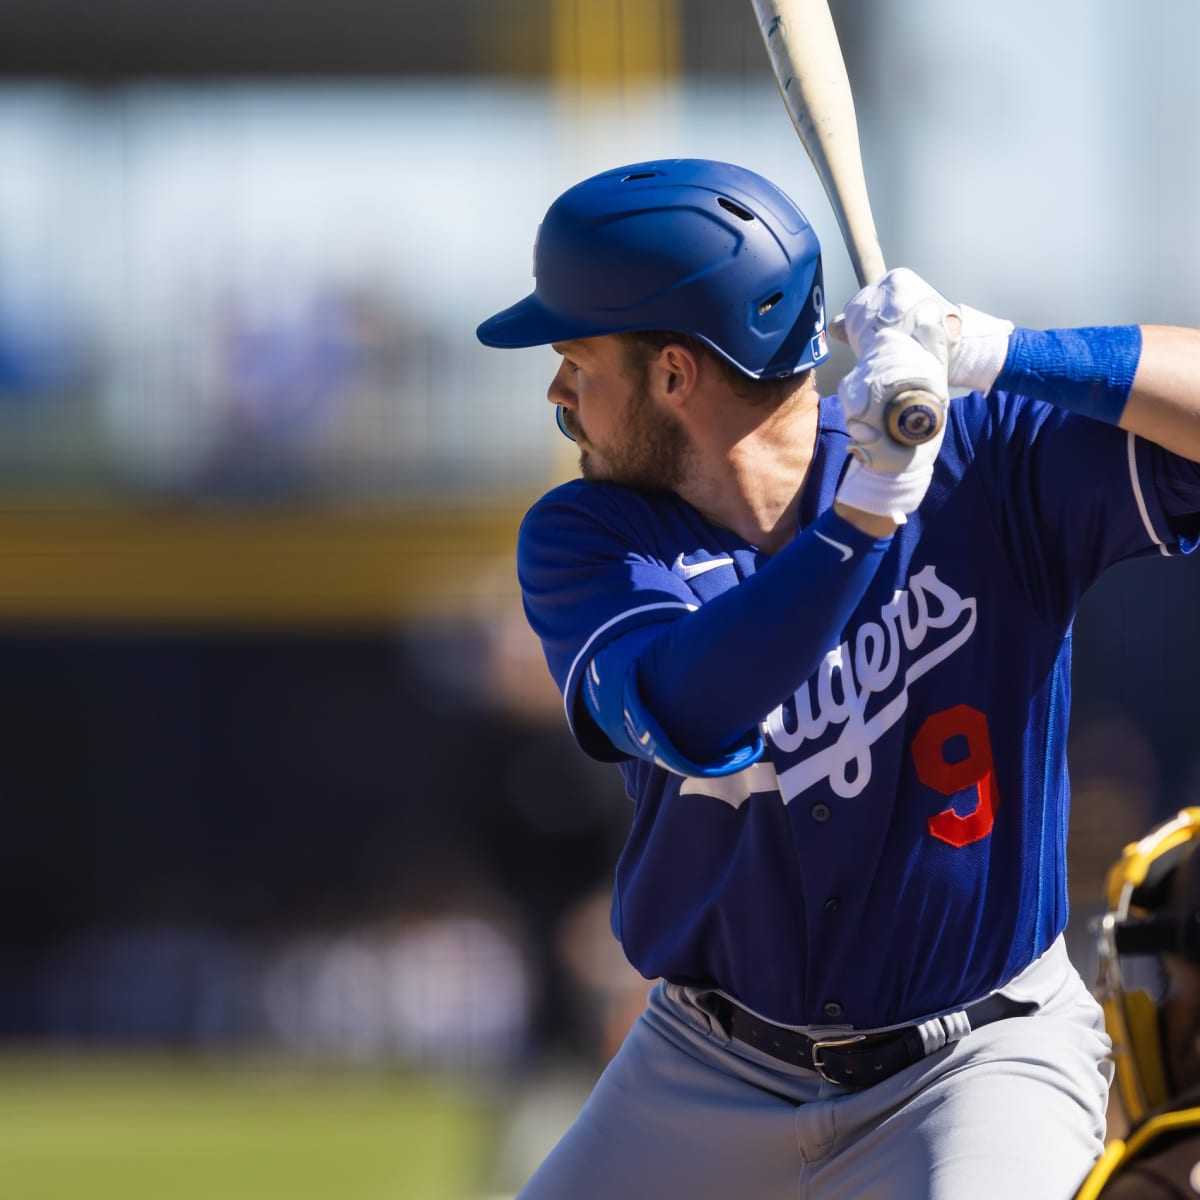 Dodgers News: Gavin Lux Learning from Freddie, Says Doc - Inside the  Dodgers